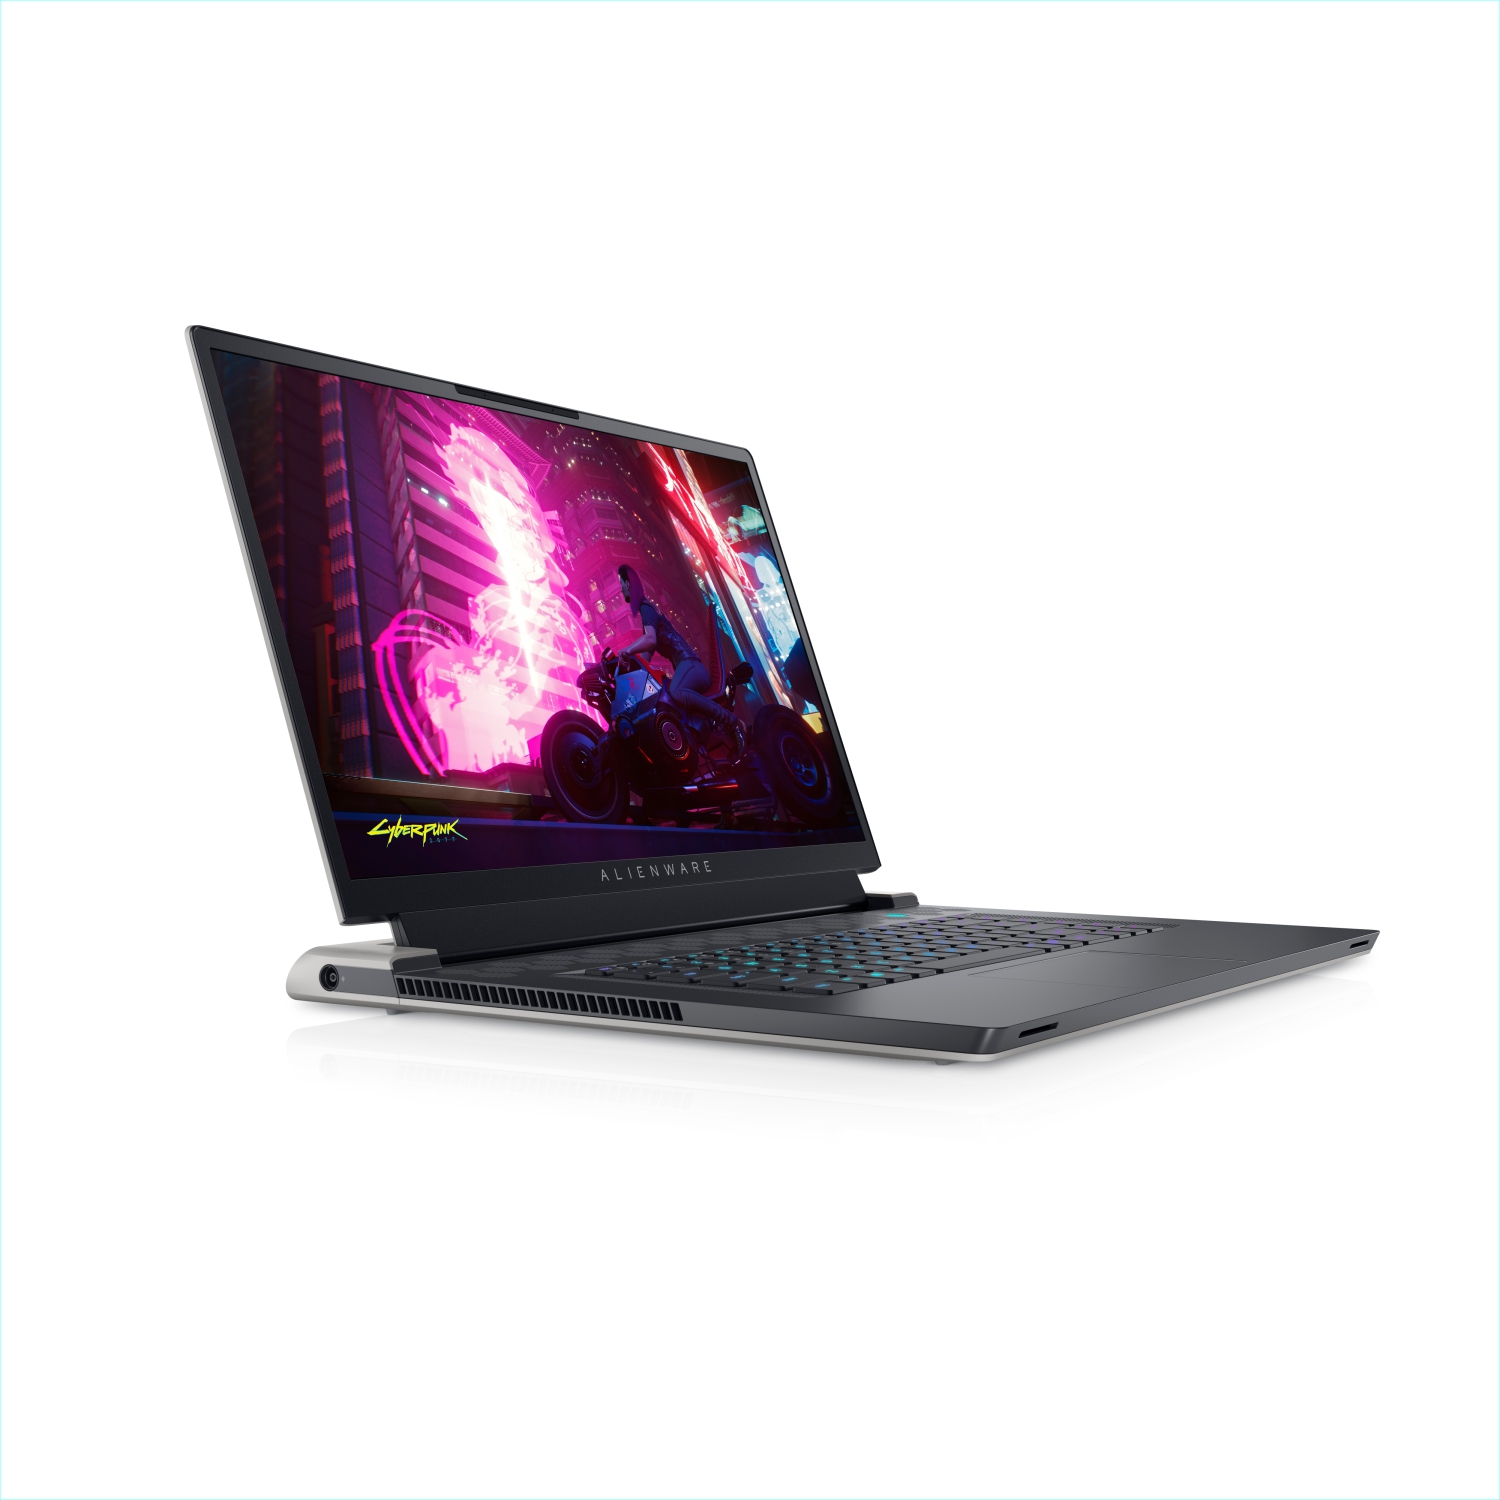 Refurbished (Excellent) - Dell Alienware X17 R1 Gaming Laptop (2021) | 17.3" 4K | Core i7 - 256GB SSD + 256GB SSD - 32GB RAM - RTX 3070 | 4.6 GHz - 11th Gen CPU Certified